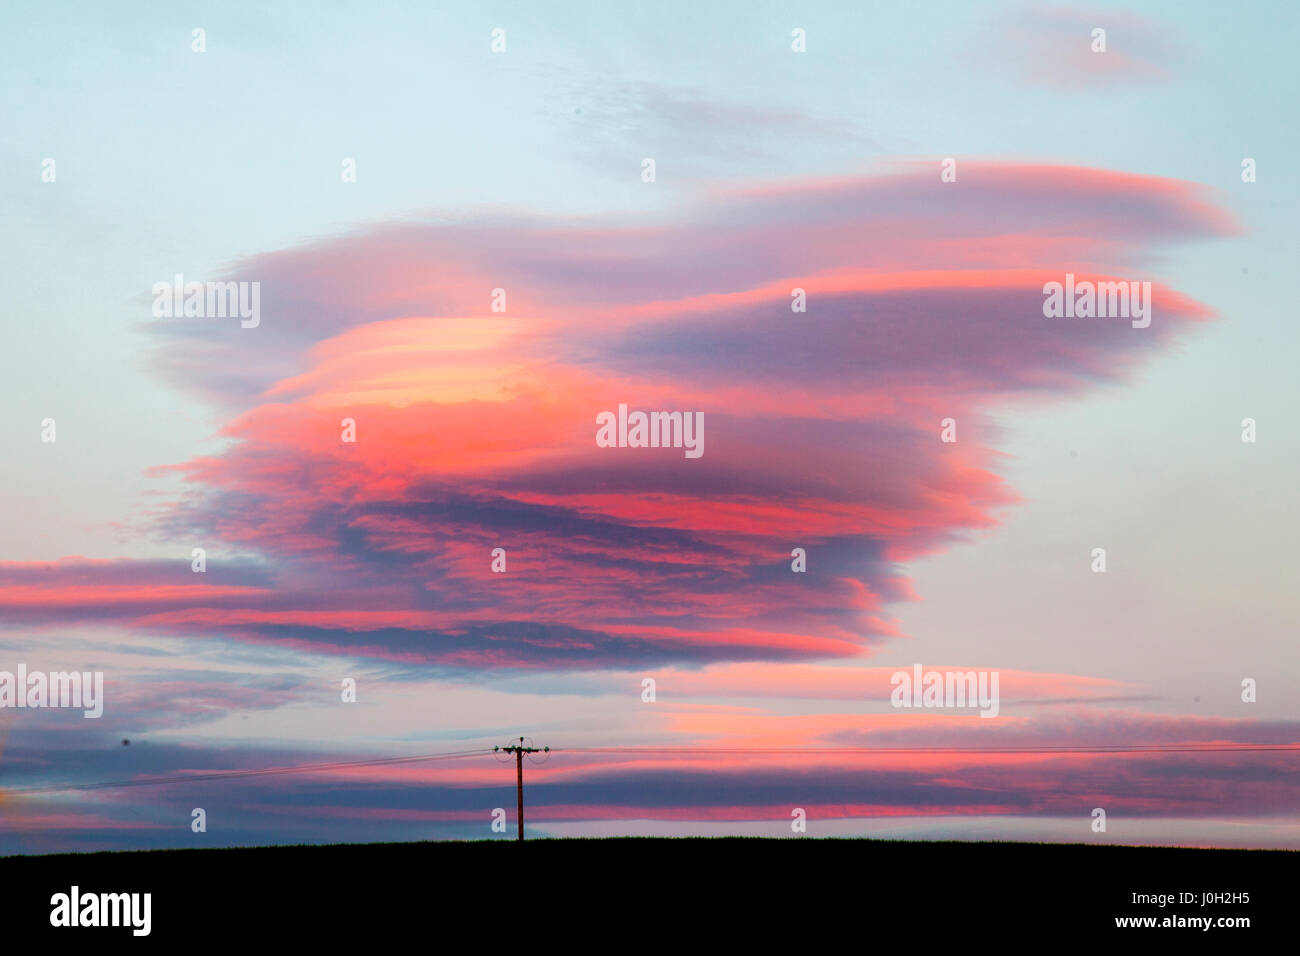 Lenticular 'UFO' Clouds, mountain waves in the air form at dawn in Stonehaven, Scotland, UK UK Weather. 13th April, 2017.  Lenticular clouds are stationary lens-shaped clouds that form in the troposphere, normally in perpendicular alignment to the wind direction and have been regularly confused for UFOs throughout history due to the their smooth, round or oval structure. A distinctive cloud formation resembling lenses and are thought to be an explanation for some supposed UFO sightings. Stock Photo